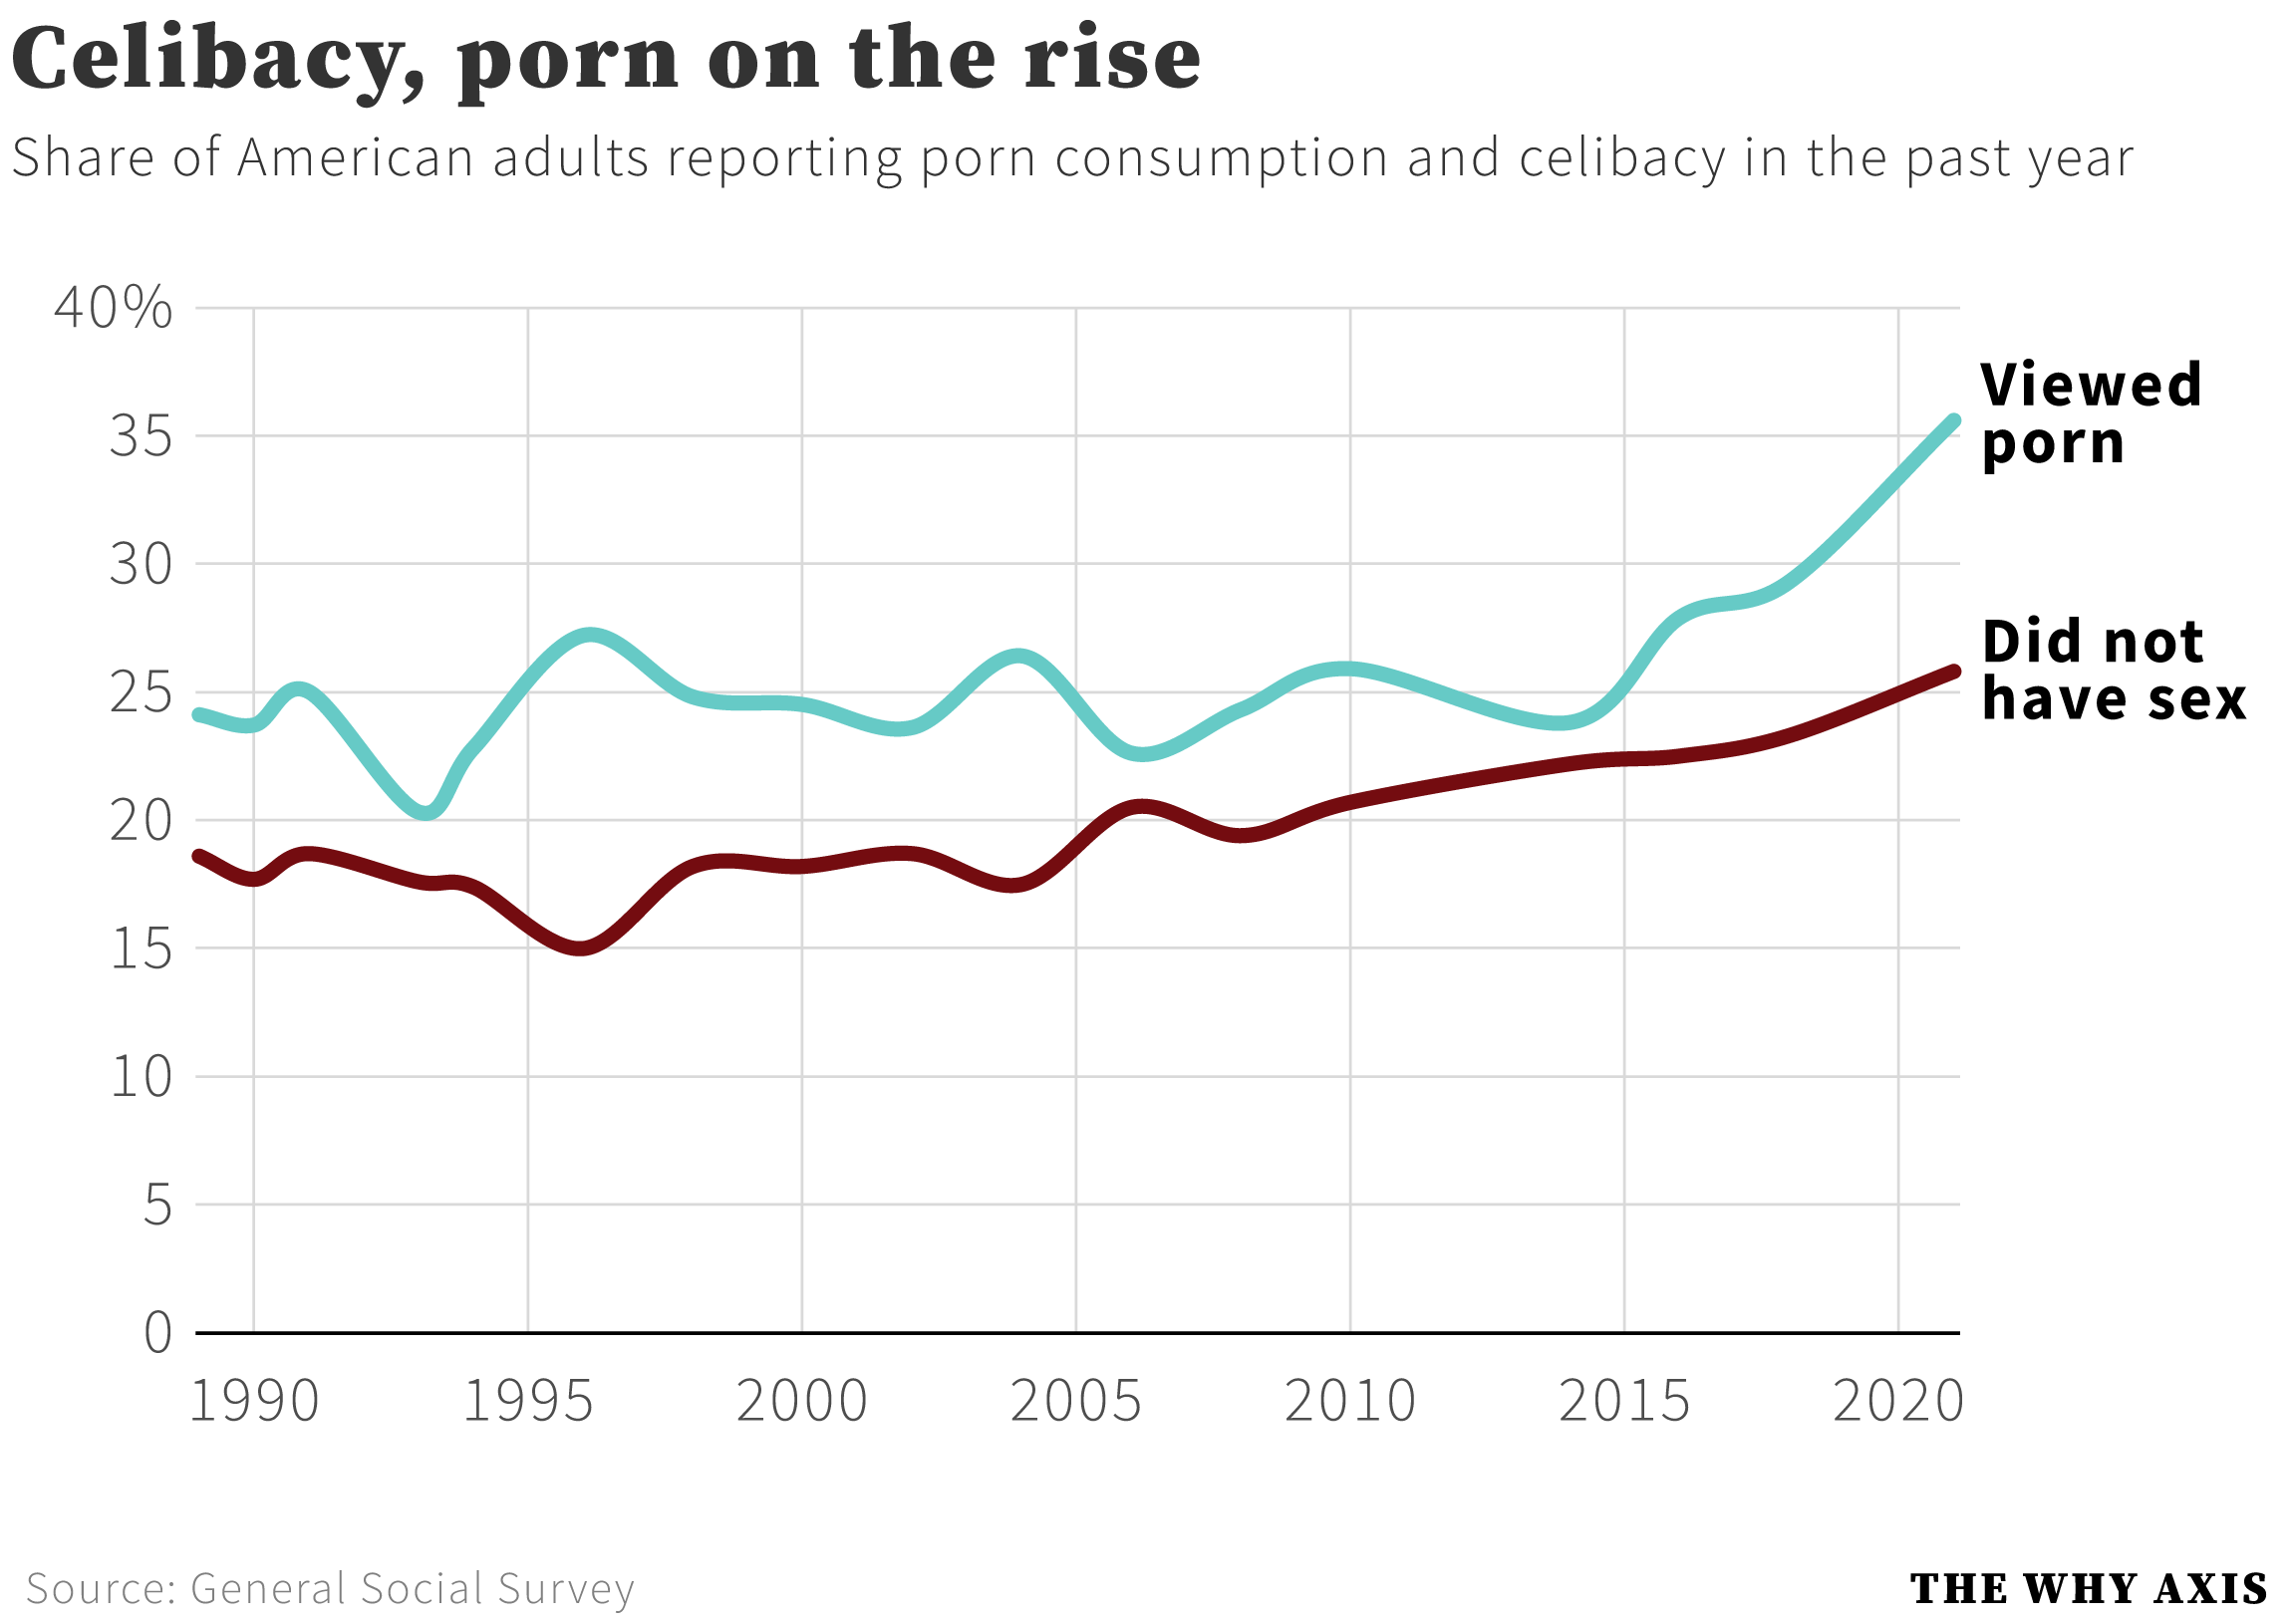 Teengrilsex - More porn, less sex: how the pandemic scrambled American intimacy